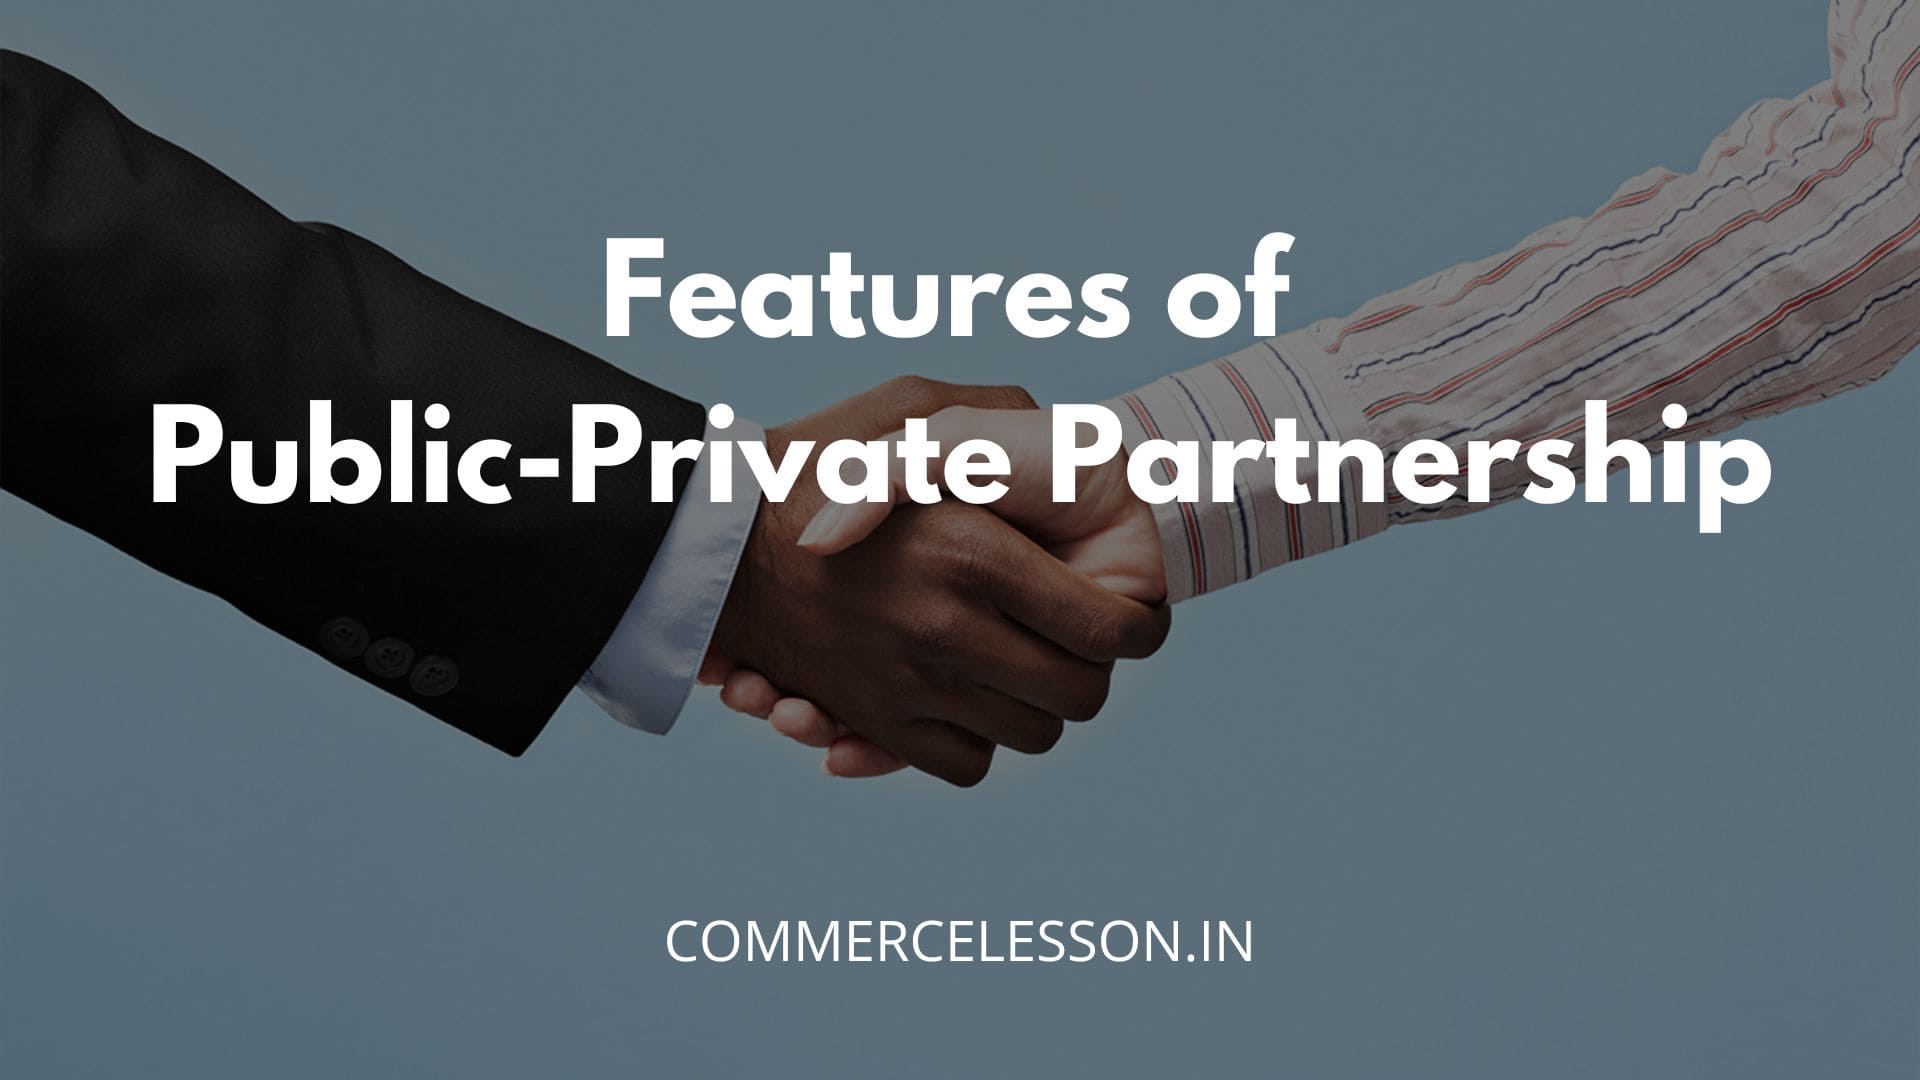 Features of Public-Private Partnership